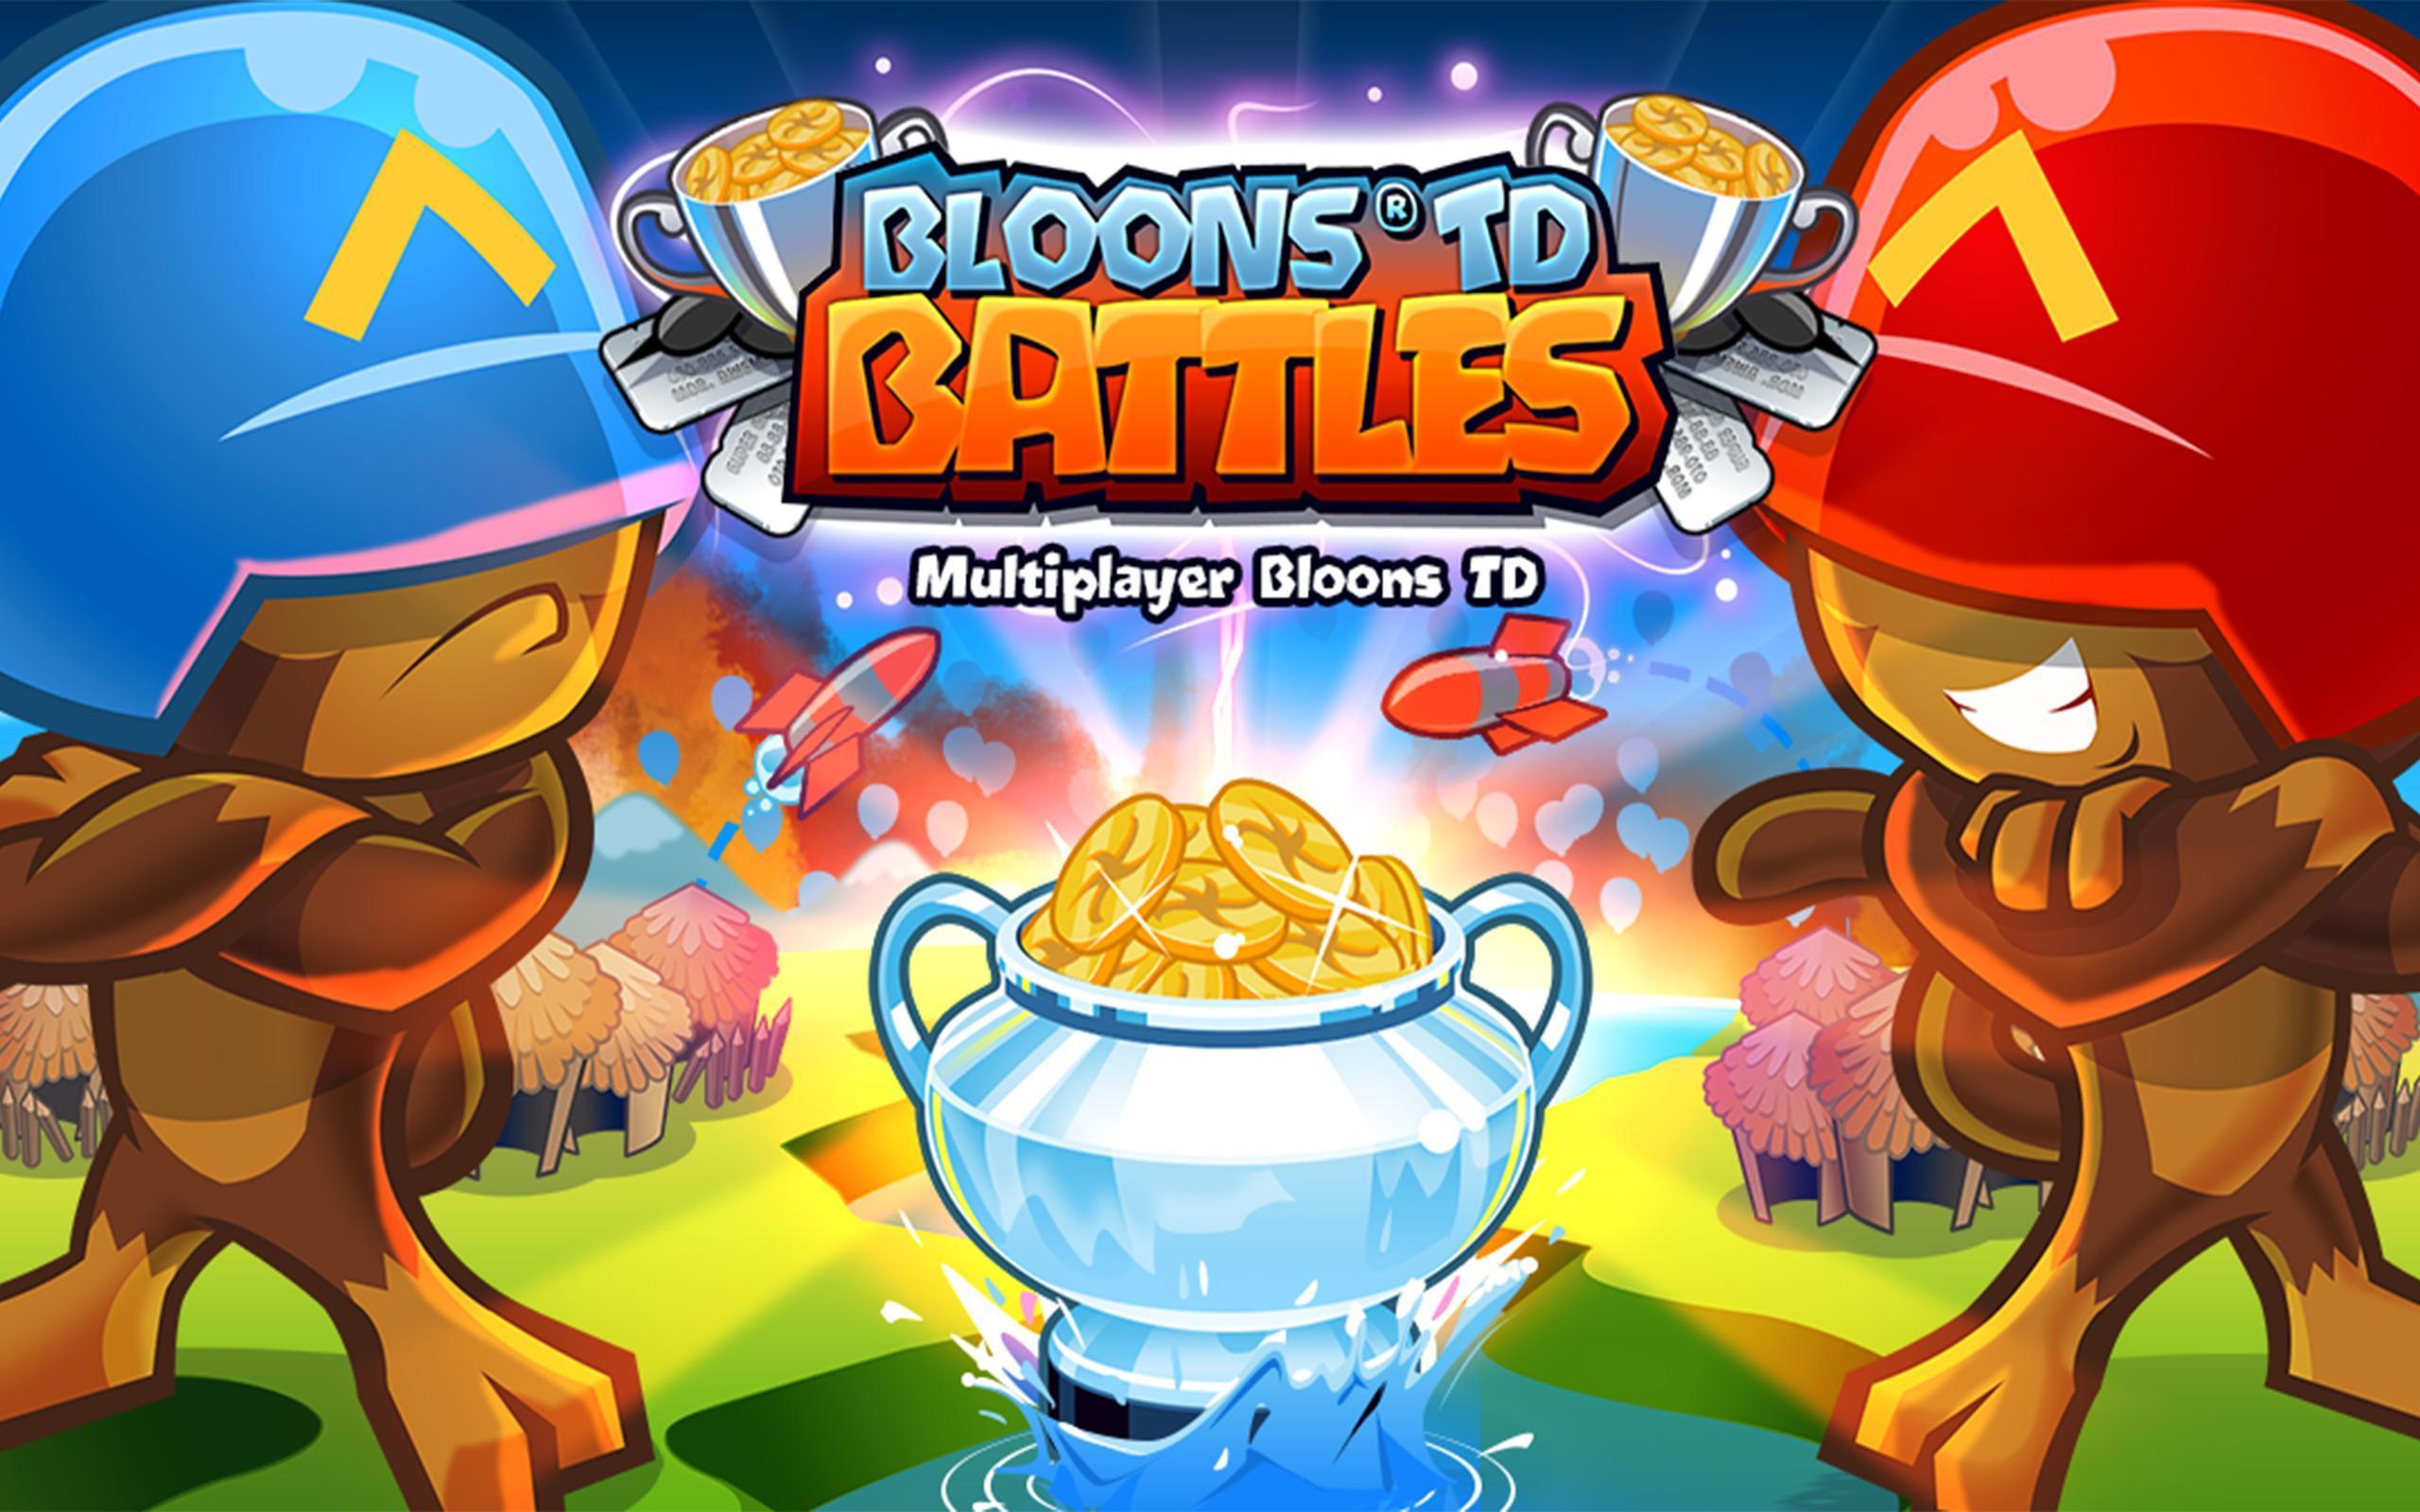 Bloons TD Battle free download